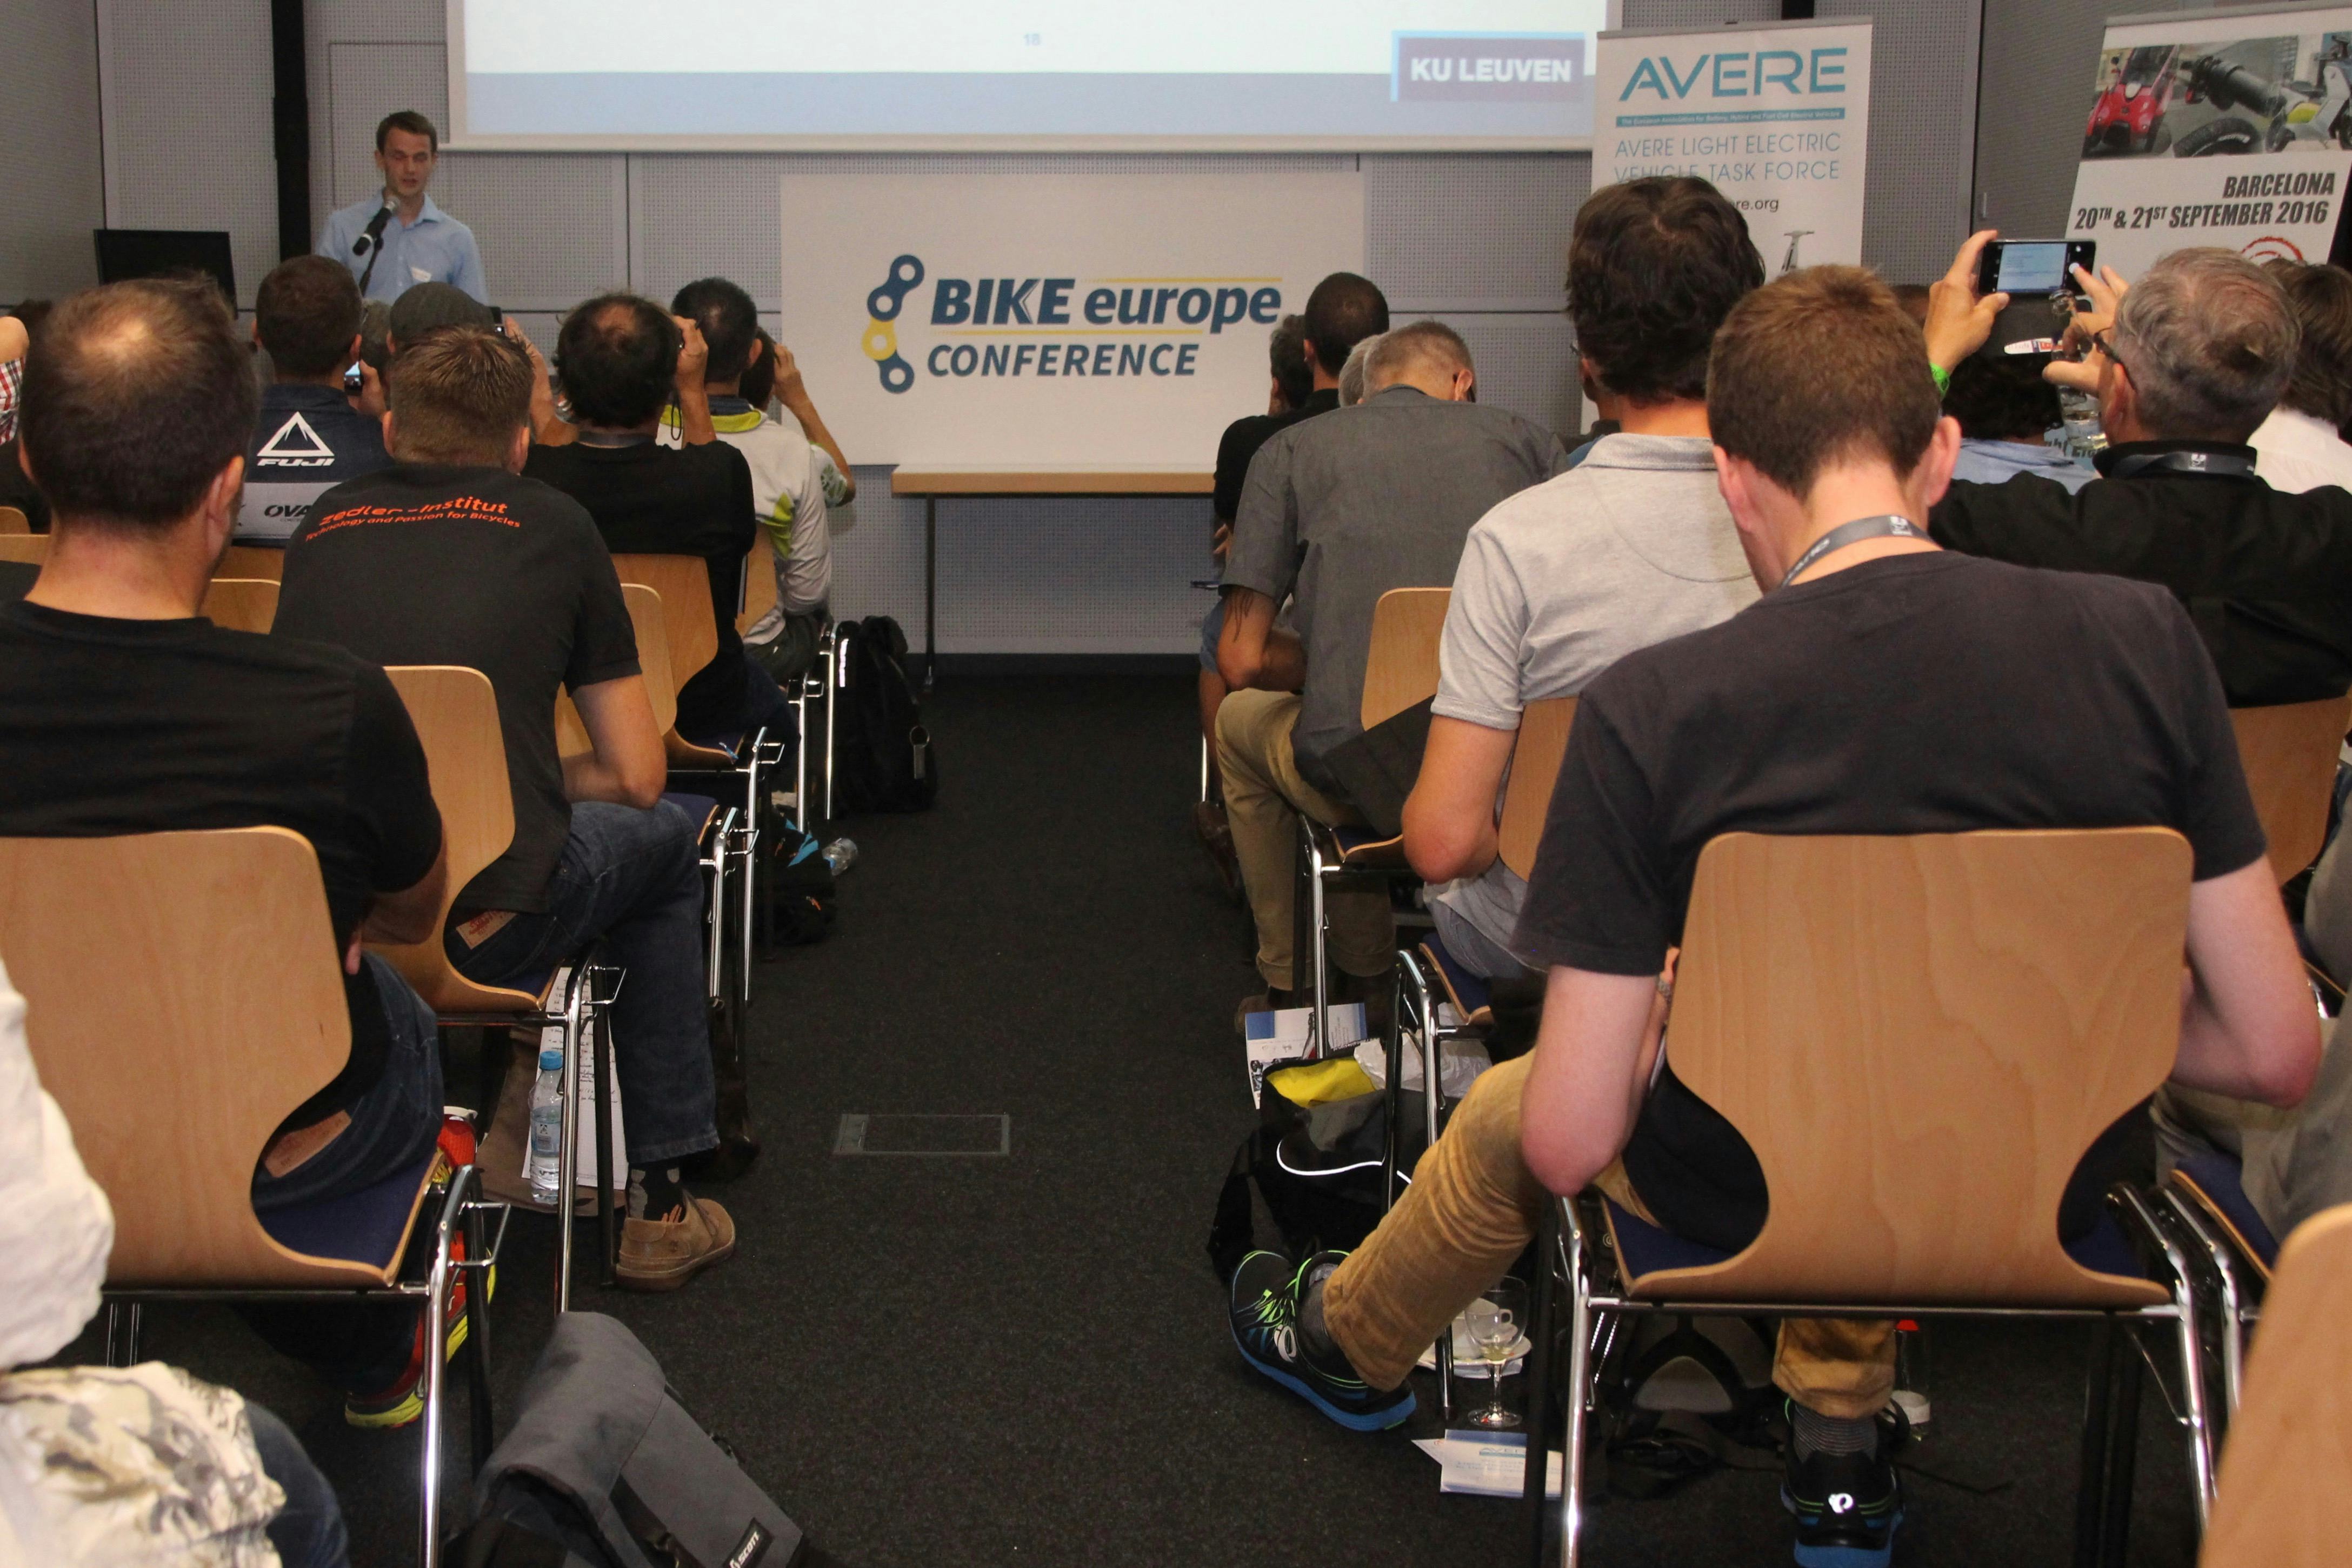 Information meeting is foremost organized for answering questions on electric bike rules in EU. – Photo Bike Europe